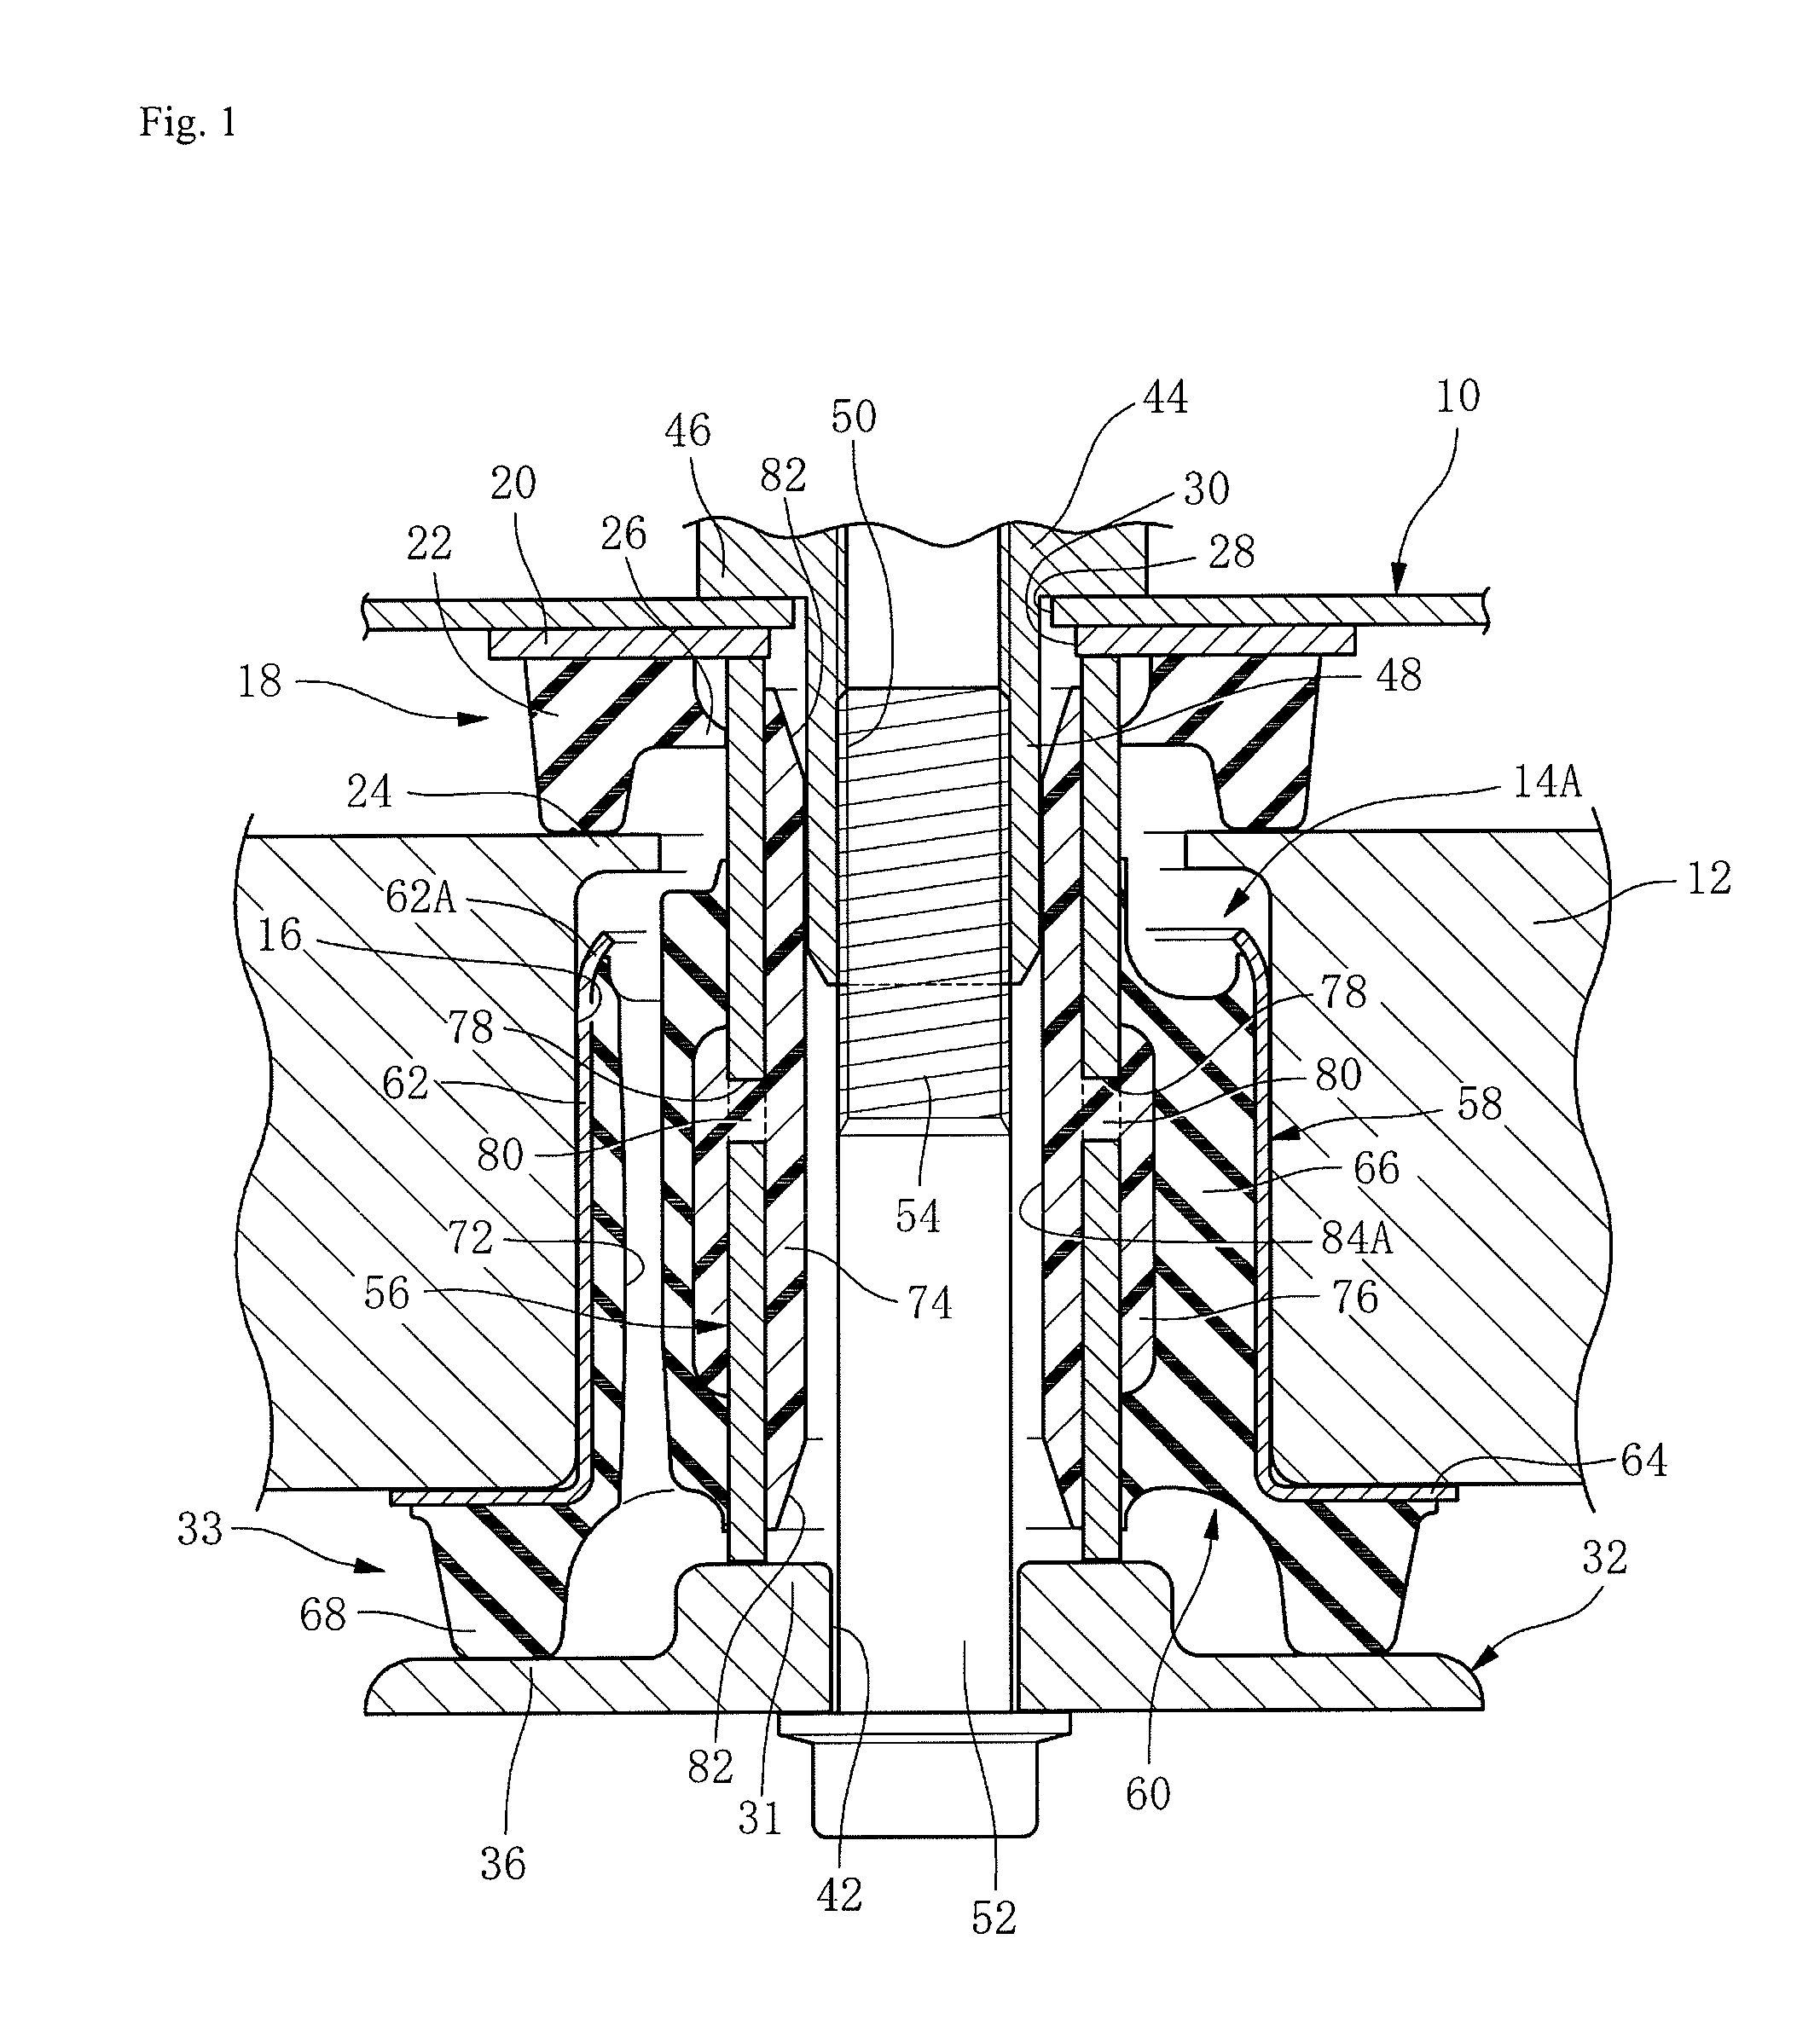 Member mount and assembly structure thereof